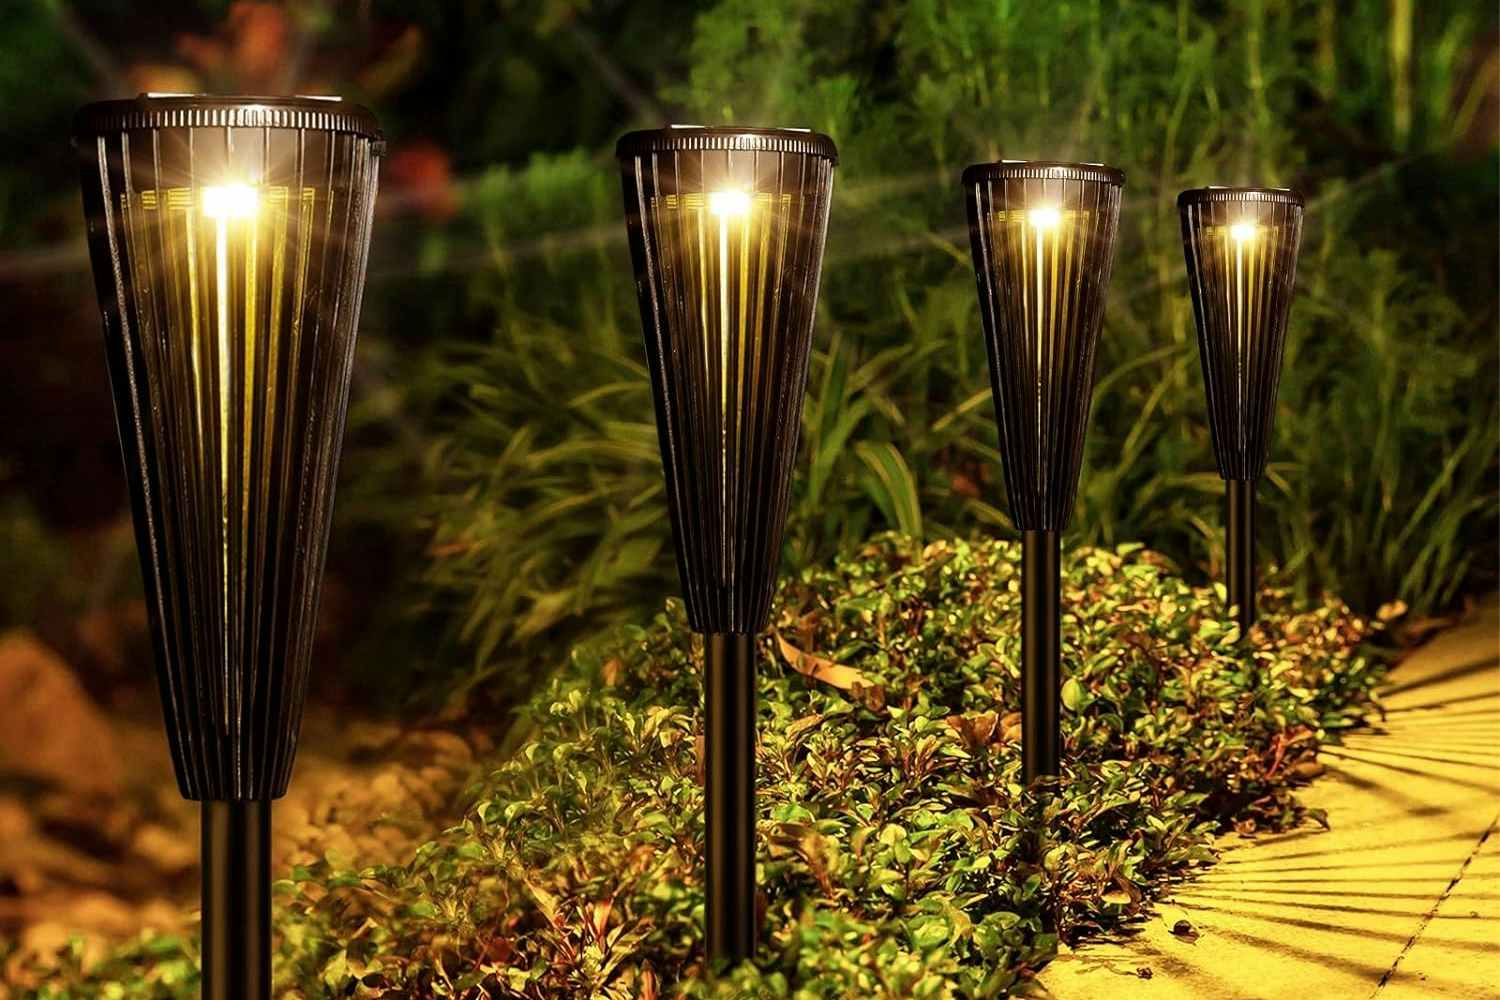  Solar Pathway Lights 8-Pack, Only $15.99 on Amazon (Reg. $32)